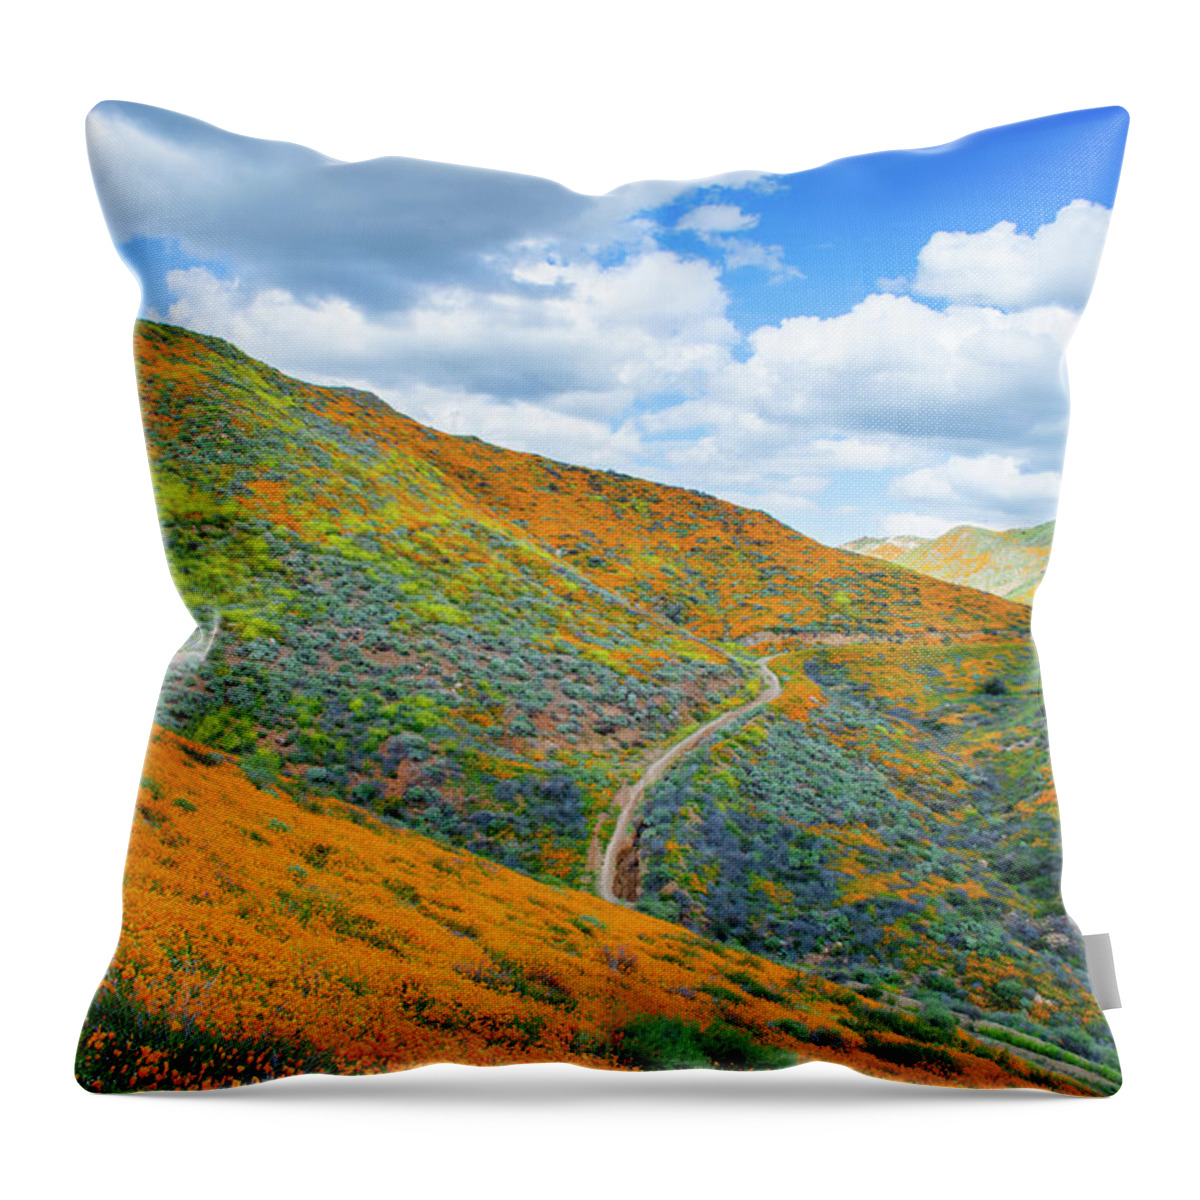 California Poppy Throw Pillow featuring the photograph Walker Canyon Super Bloom Portrait by Kyle Hanson